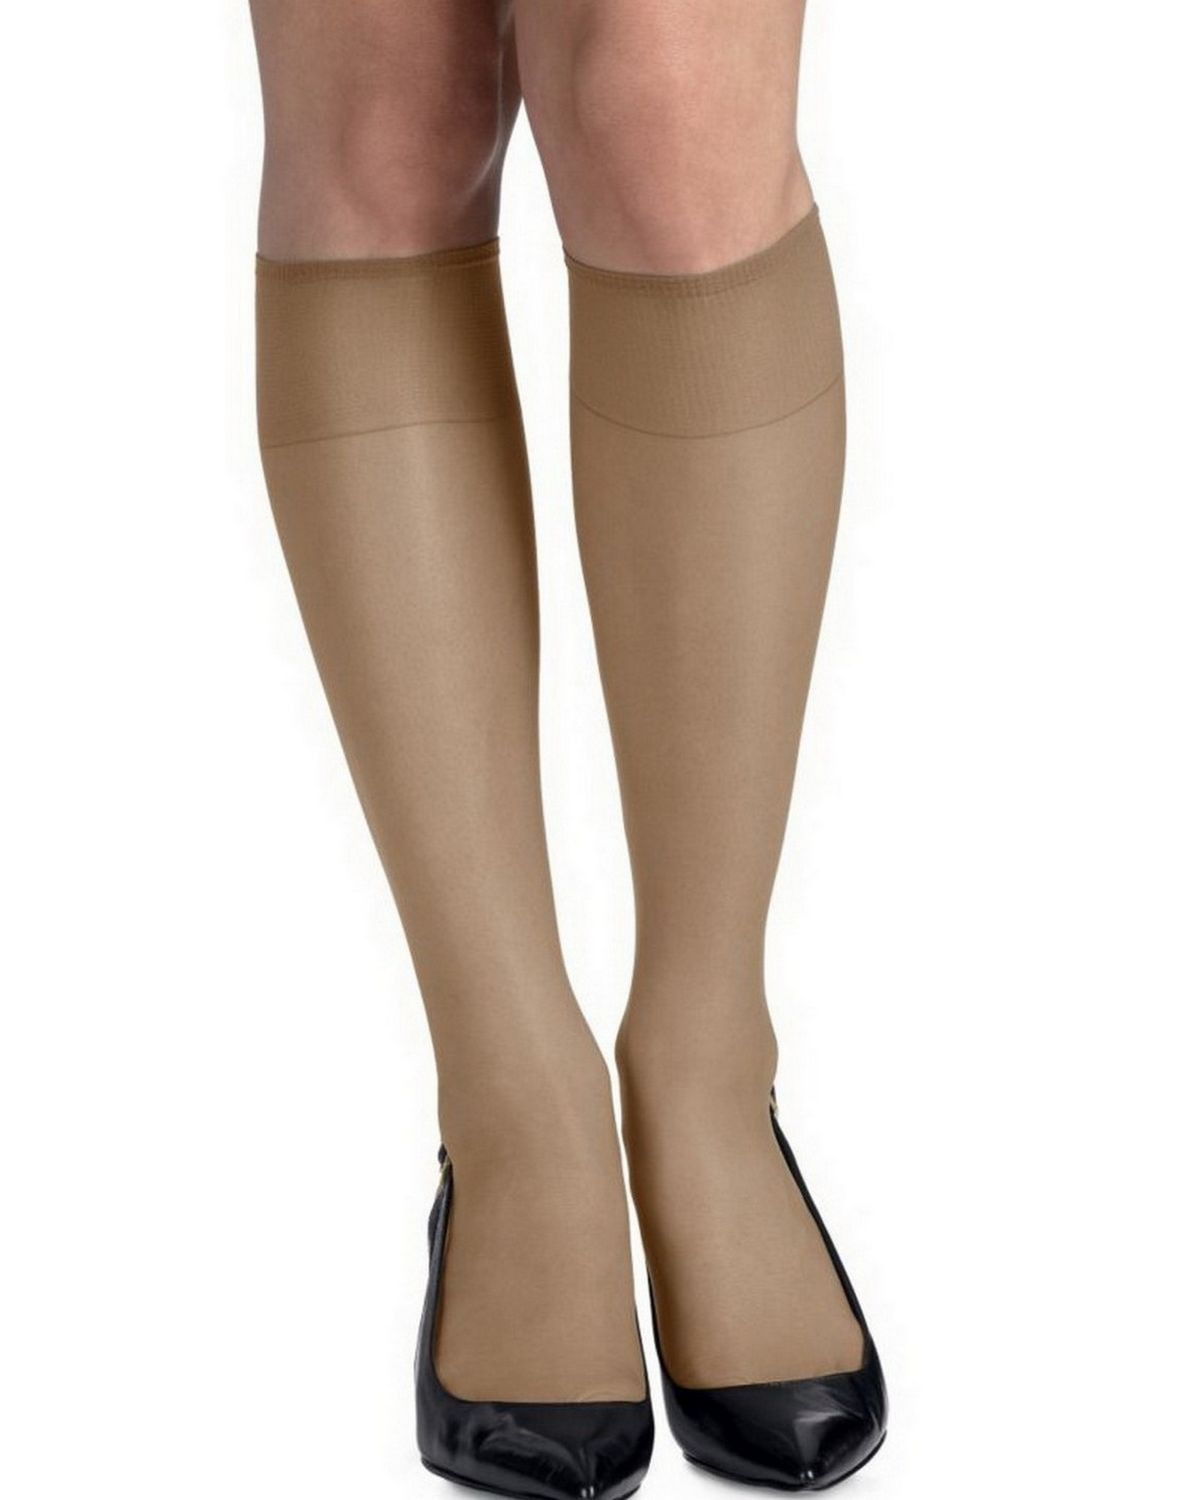 Hanes 775 Women's Silk Reflections Silky Sheer Knee Highs Reinforced Toe 2-Pack - Barely There - One Size #silk